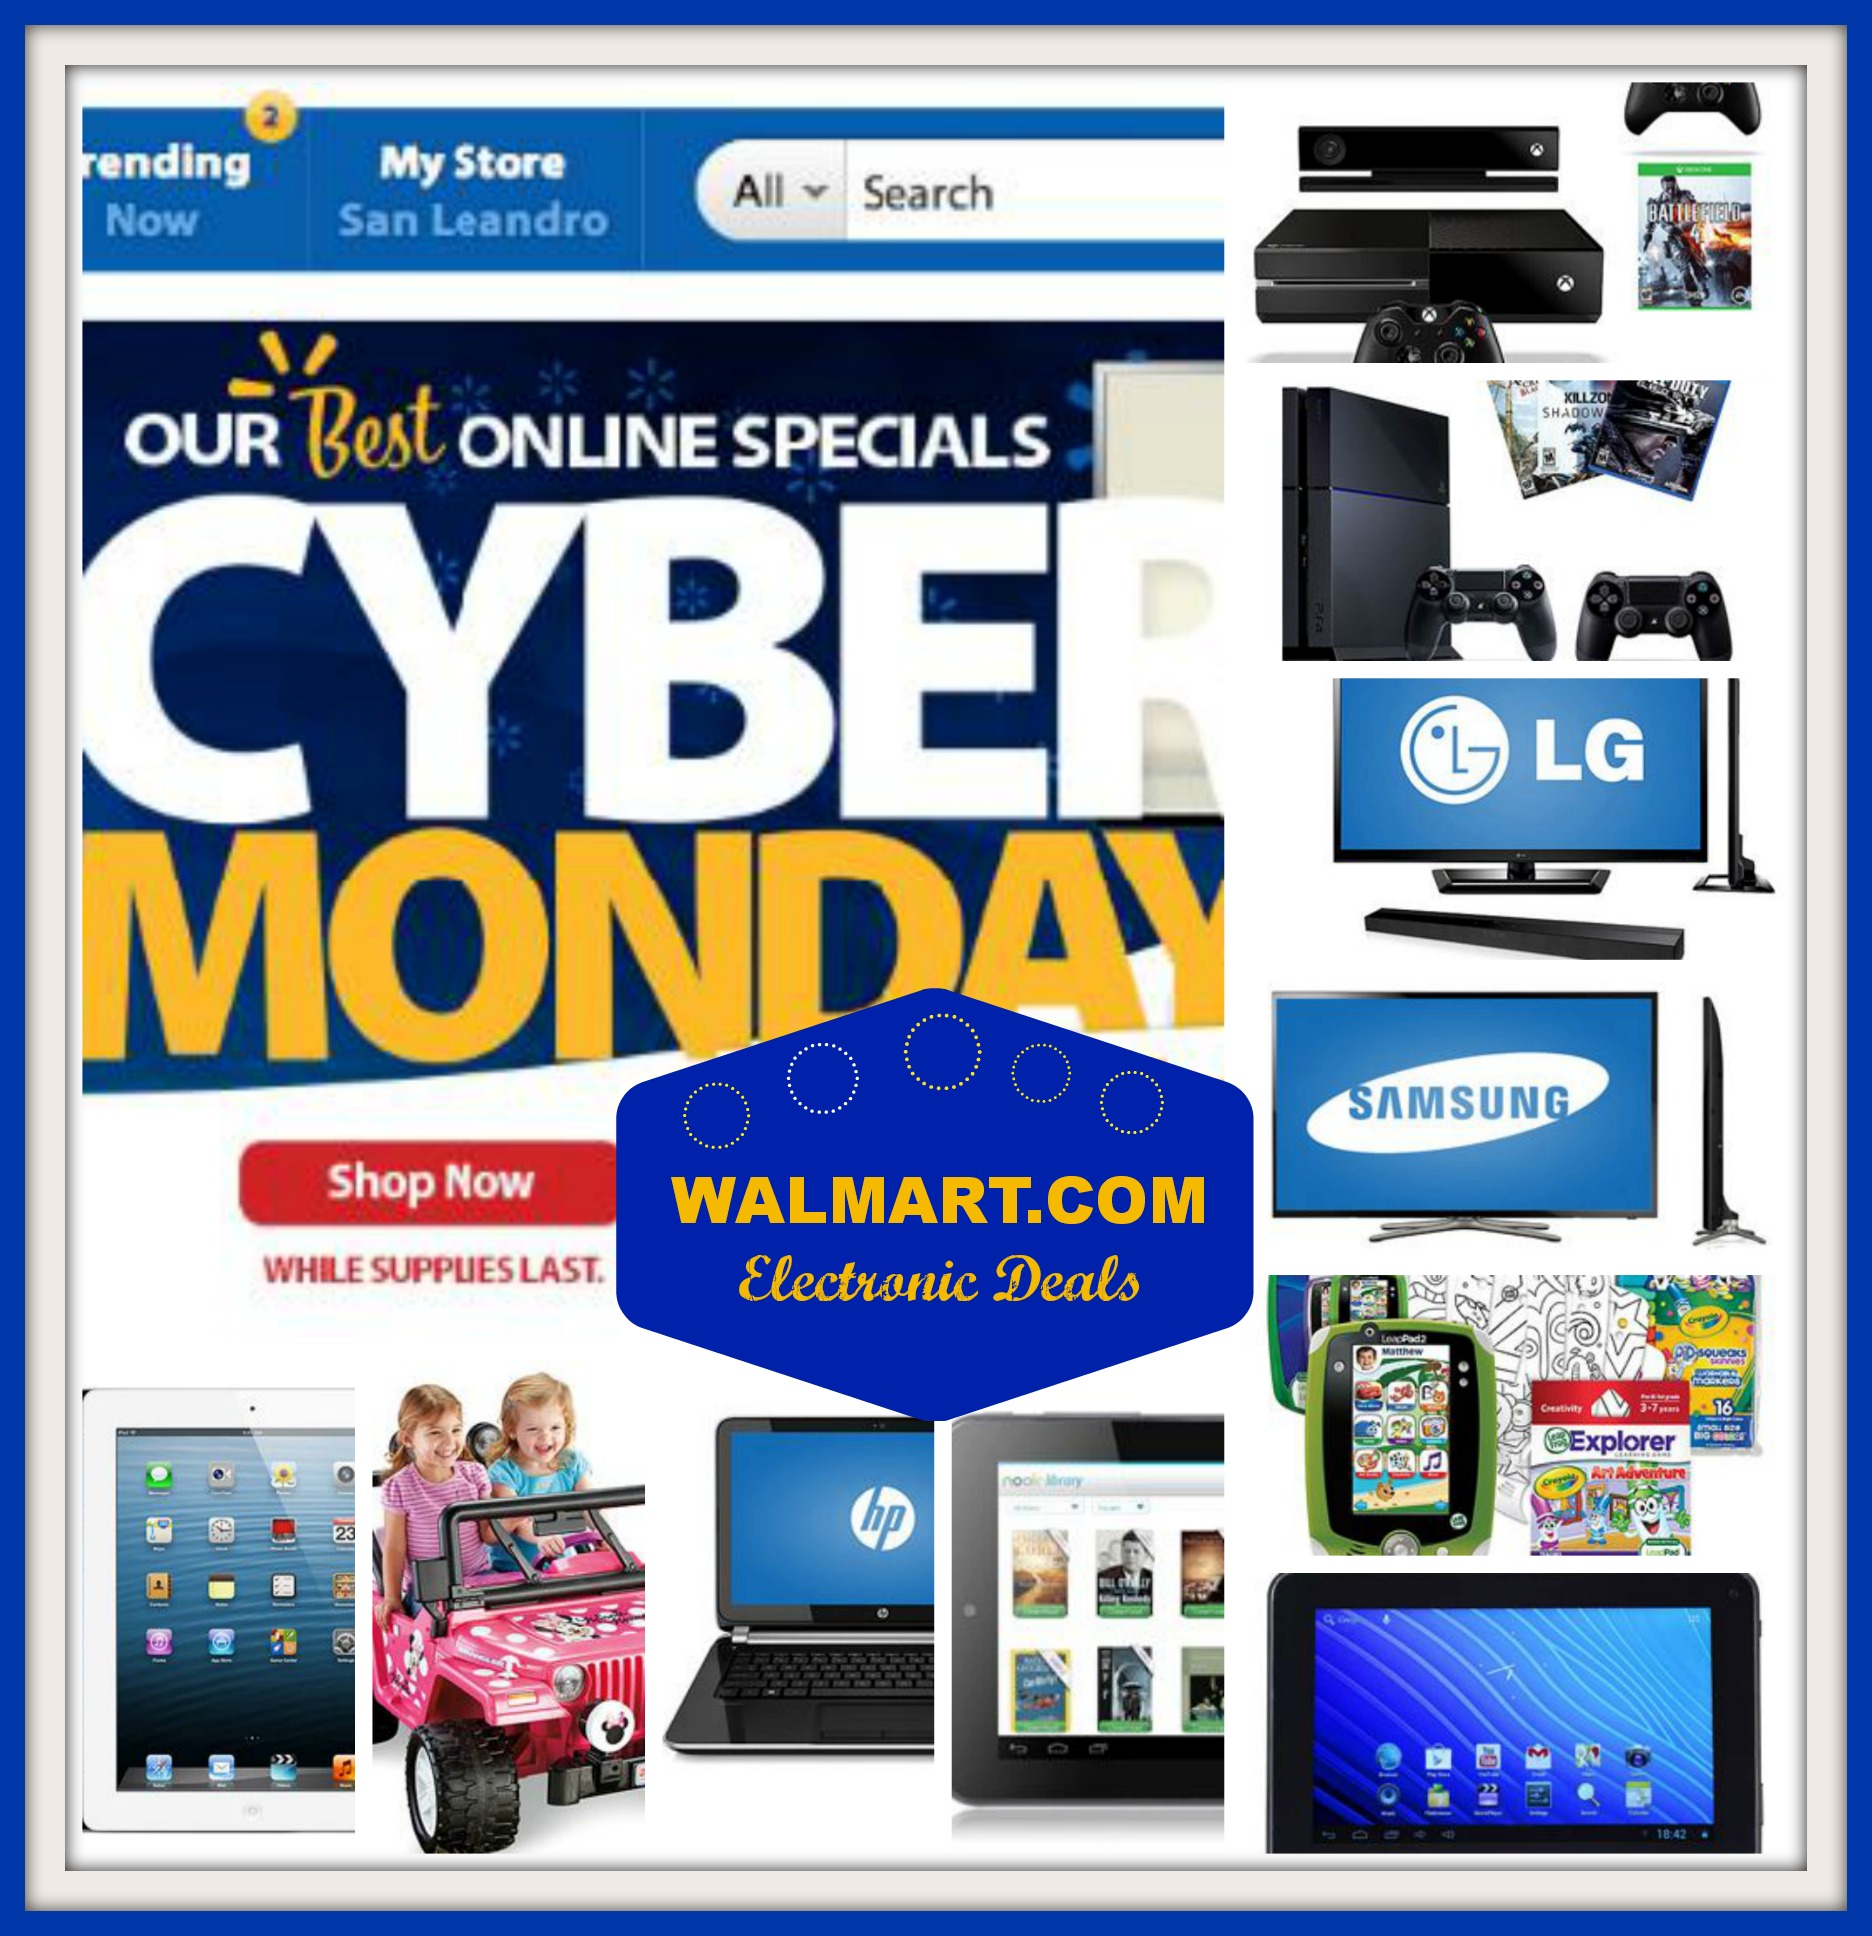 Cyber Monday Electronics Deals - The Well Connected Mom